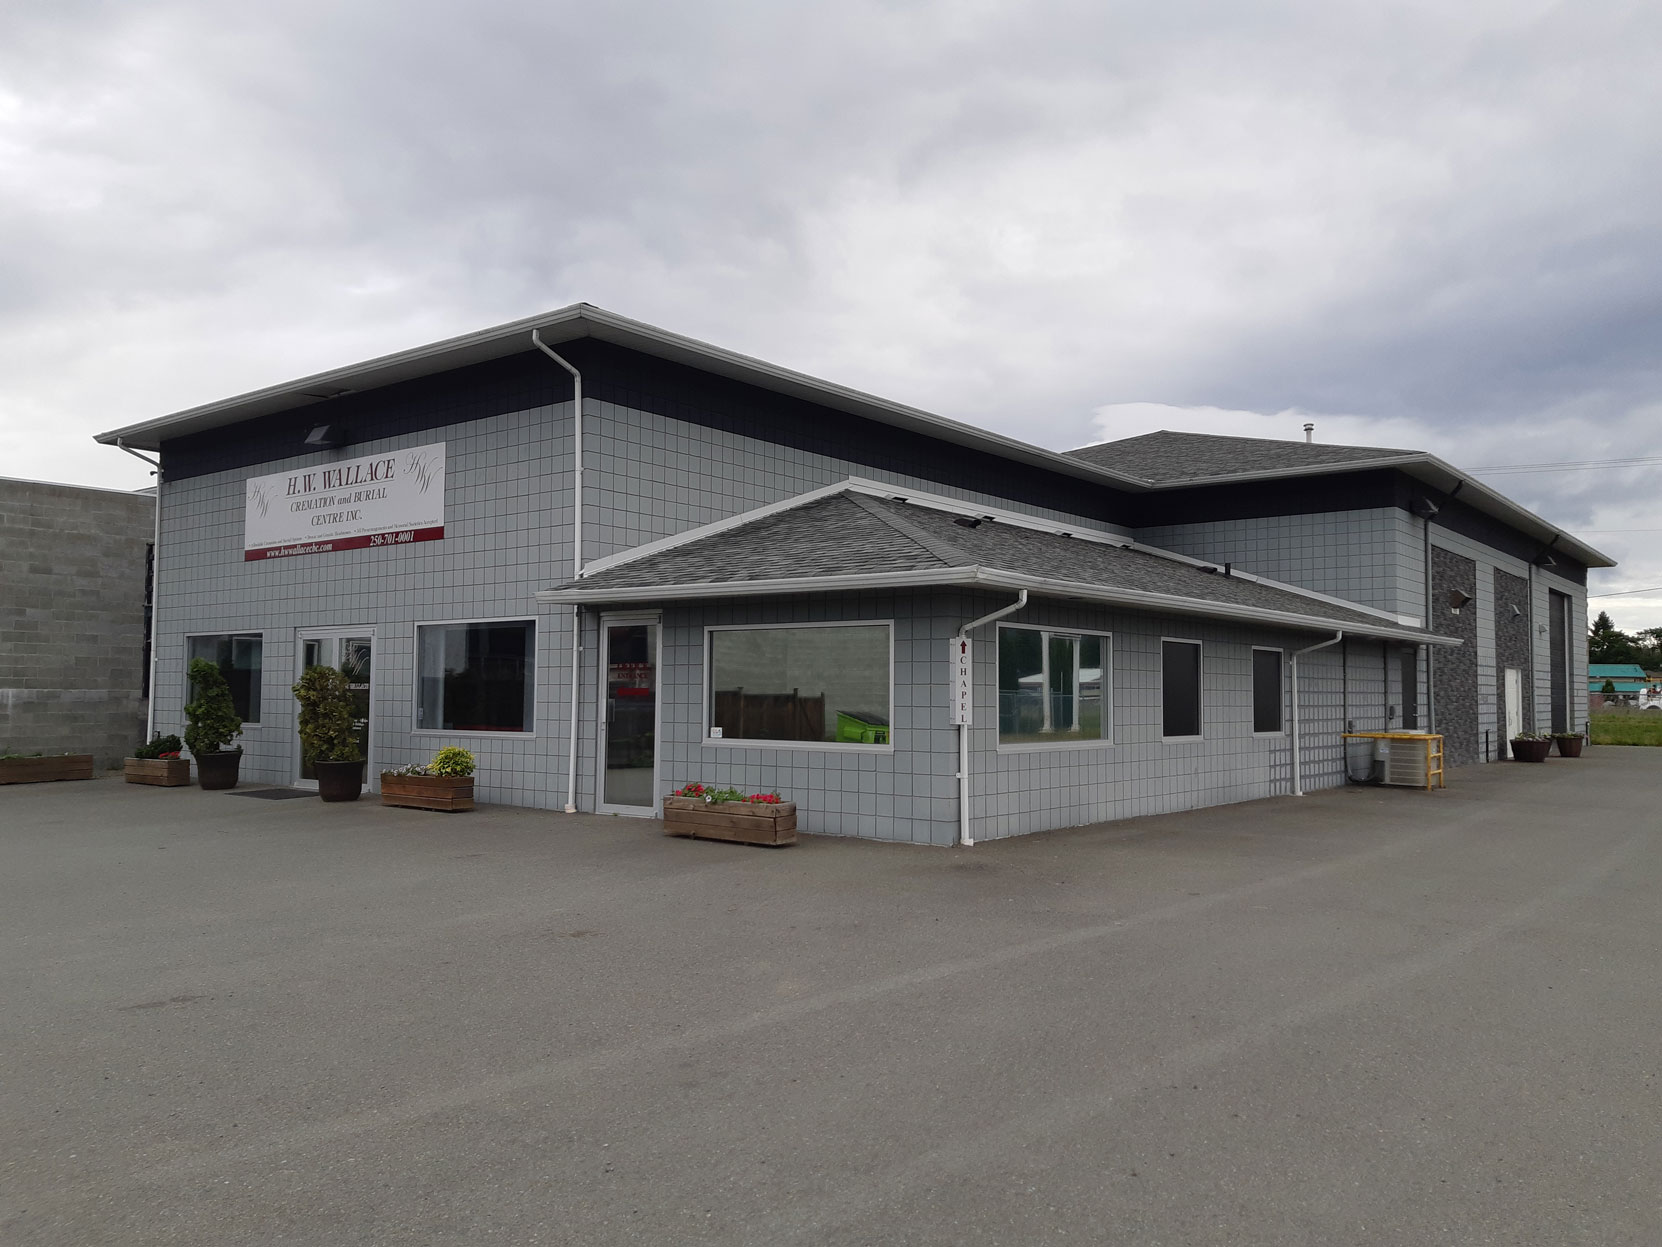 H.W. Wallace Cremation and Burial Centre, 5285 Polkey Road, Duncan, BC (photo: West Coast Driver Training)